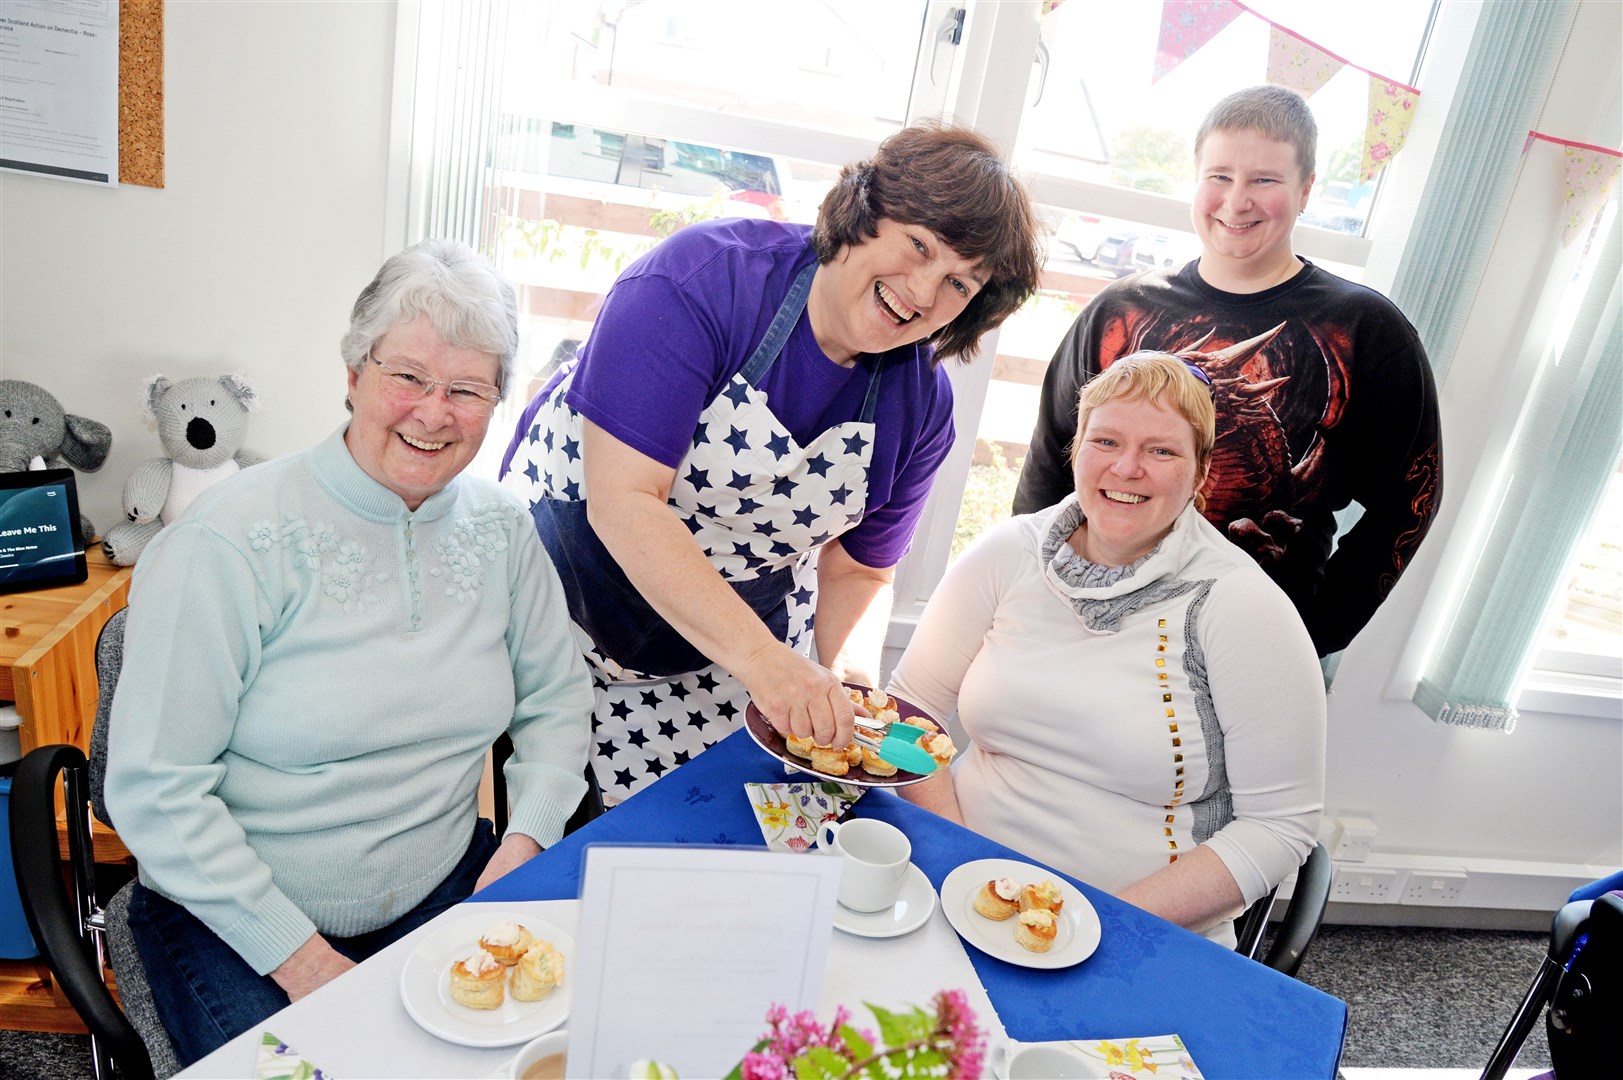 Alzheimer daycare organiser Connie Sinclair dishes out the cakes for Catriona Cowan, Balintore, with her two daughters Tiree Grant (front right), Balintore and Islay Grant, Dingwall. Picture: Gair Fraser. Image No. 044121